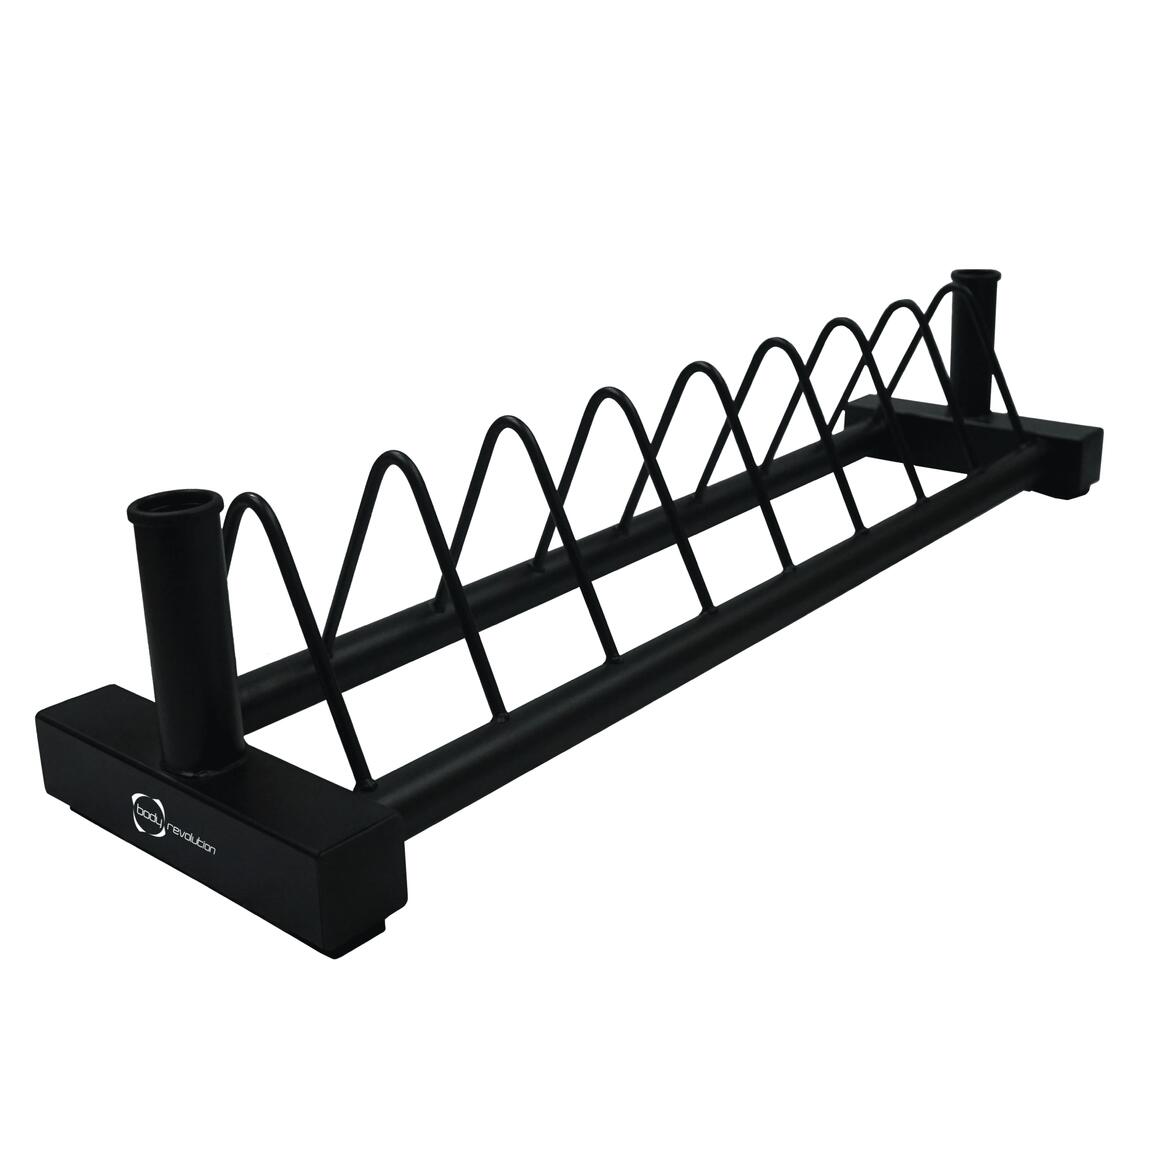 BODY REVOLUTION Olympic Bumper Weight Plate and Bar Storage Rack